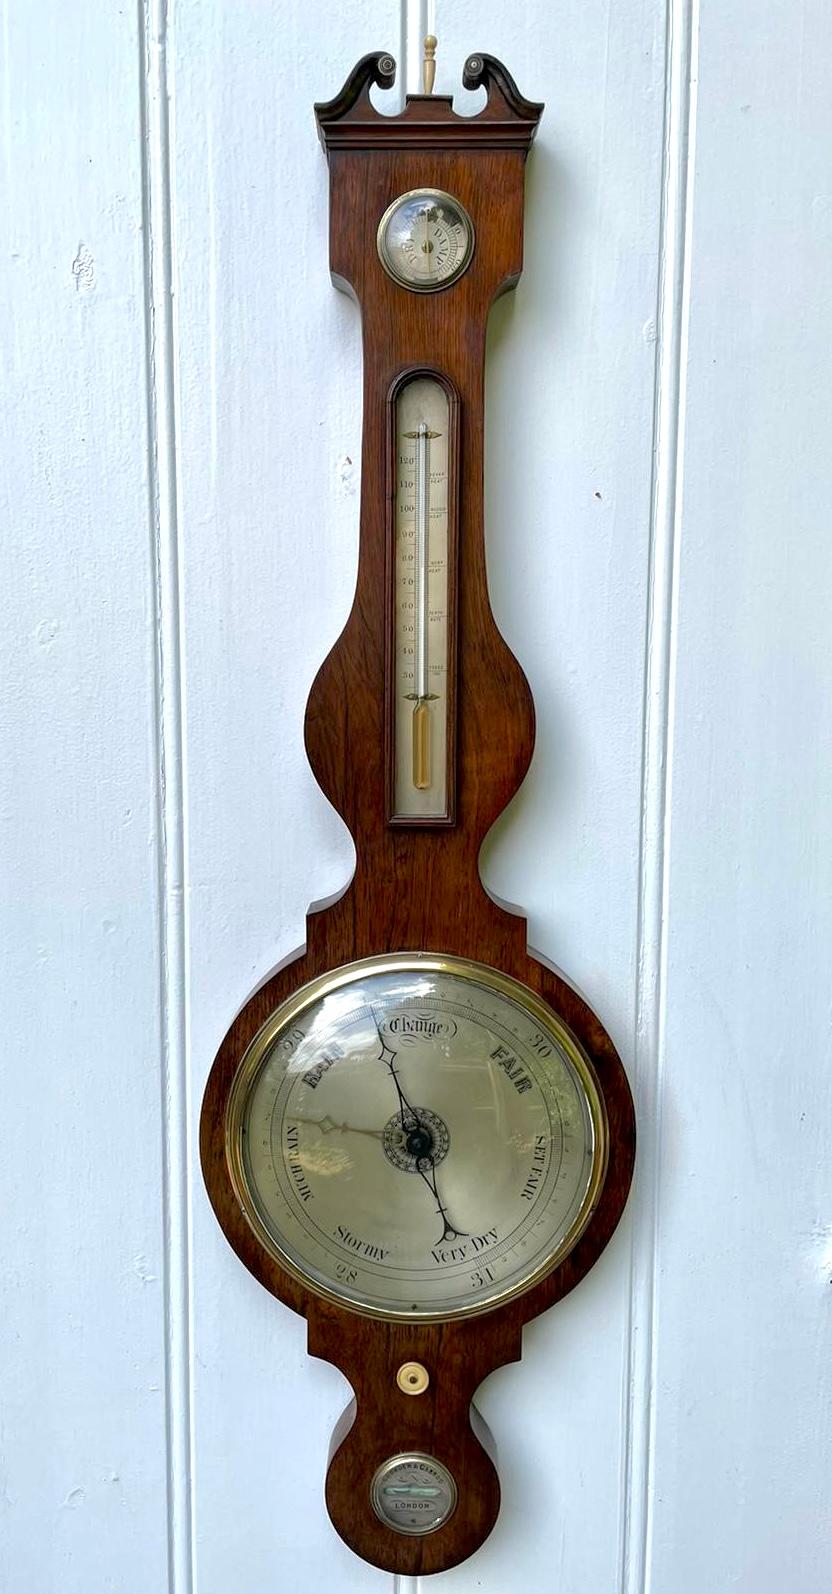 Antique George III mahogany banjo barometer having a quality mahogany case with a swan neck pedometer and the original turned bone finale, 9 inch silvered dial with original hands with a thermometer, hygrometer, spirit level and the original bone